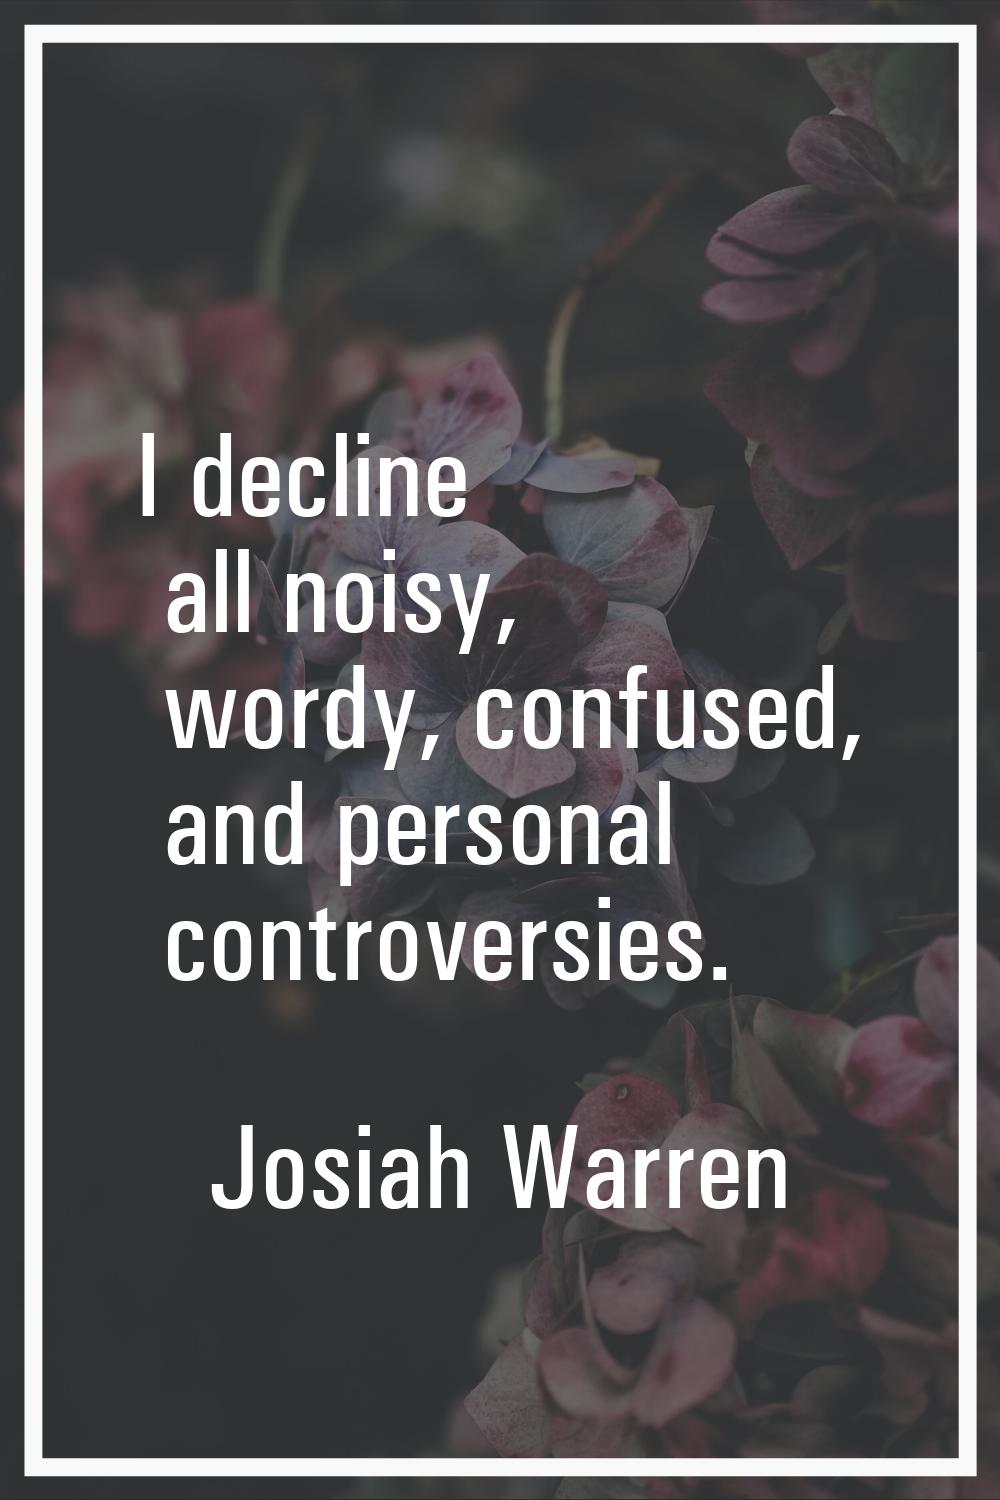 I decline all noisy, wordy, confused, and personal controversies.